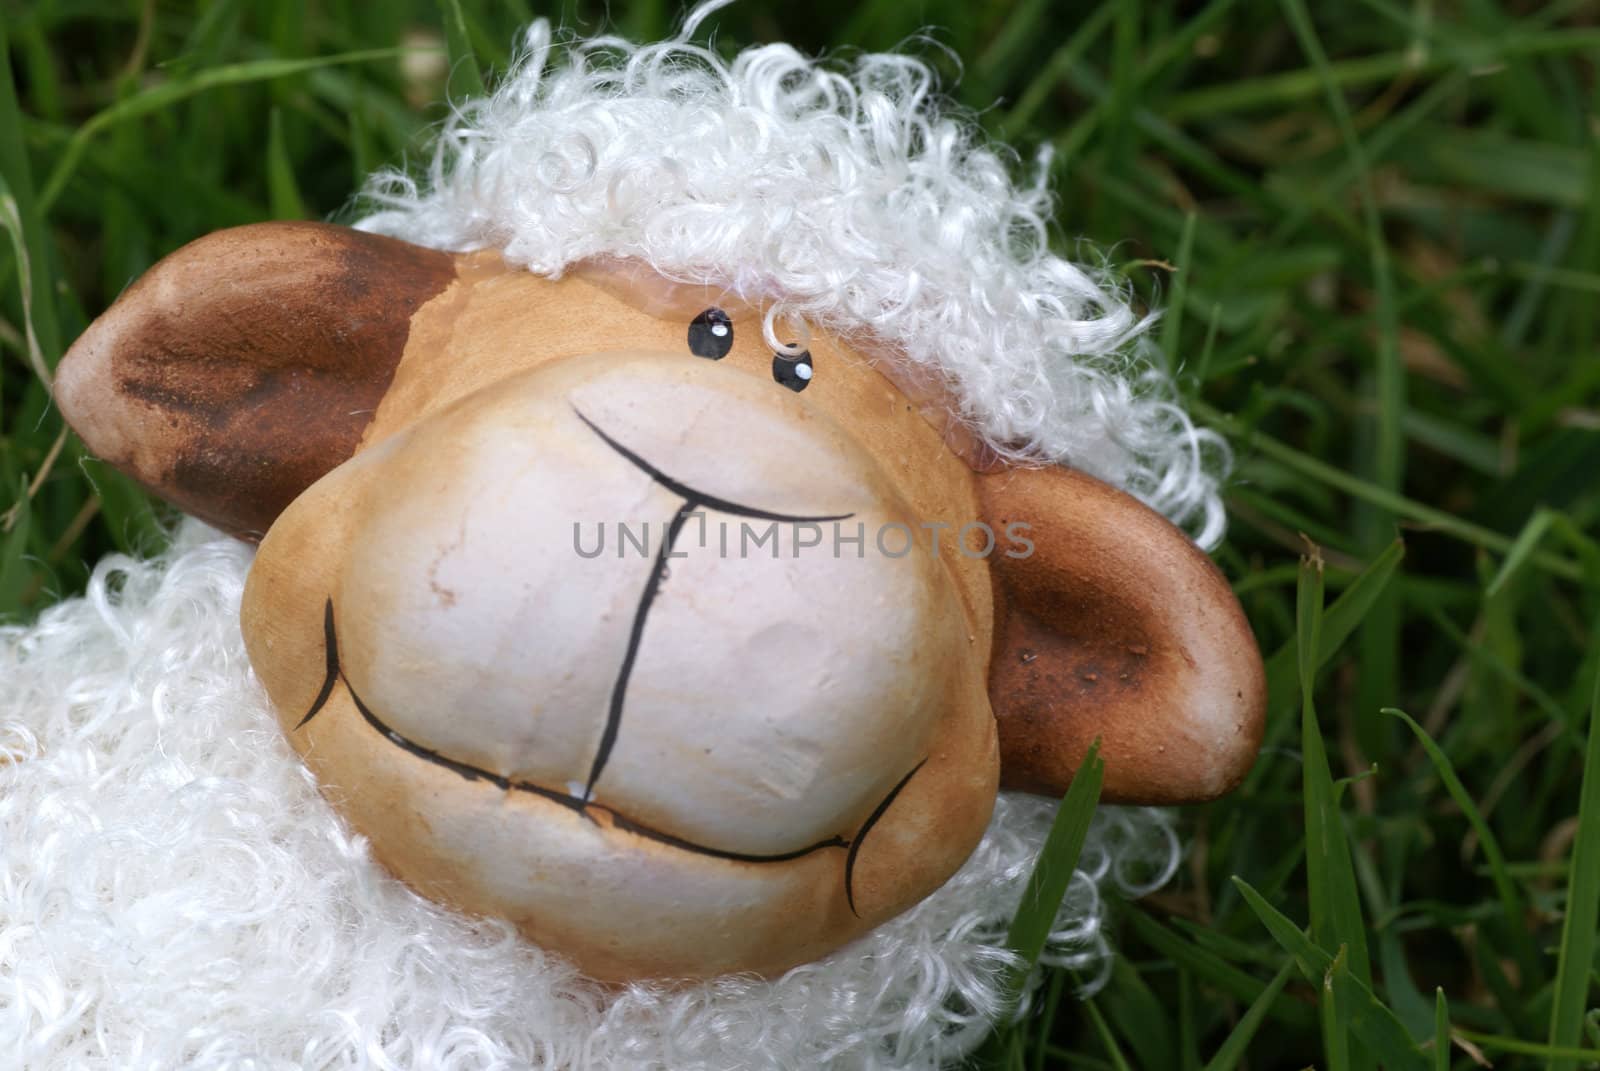 Curly sheep sitting in grass.